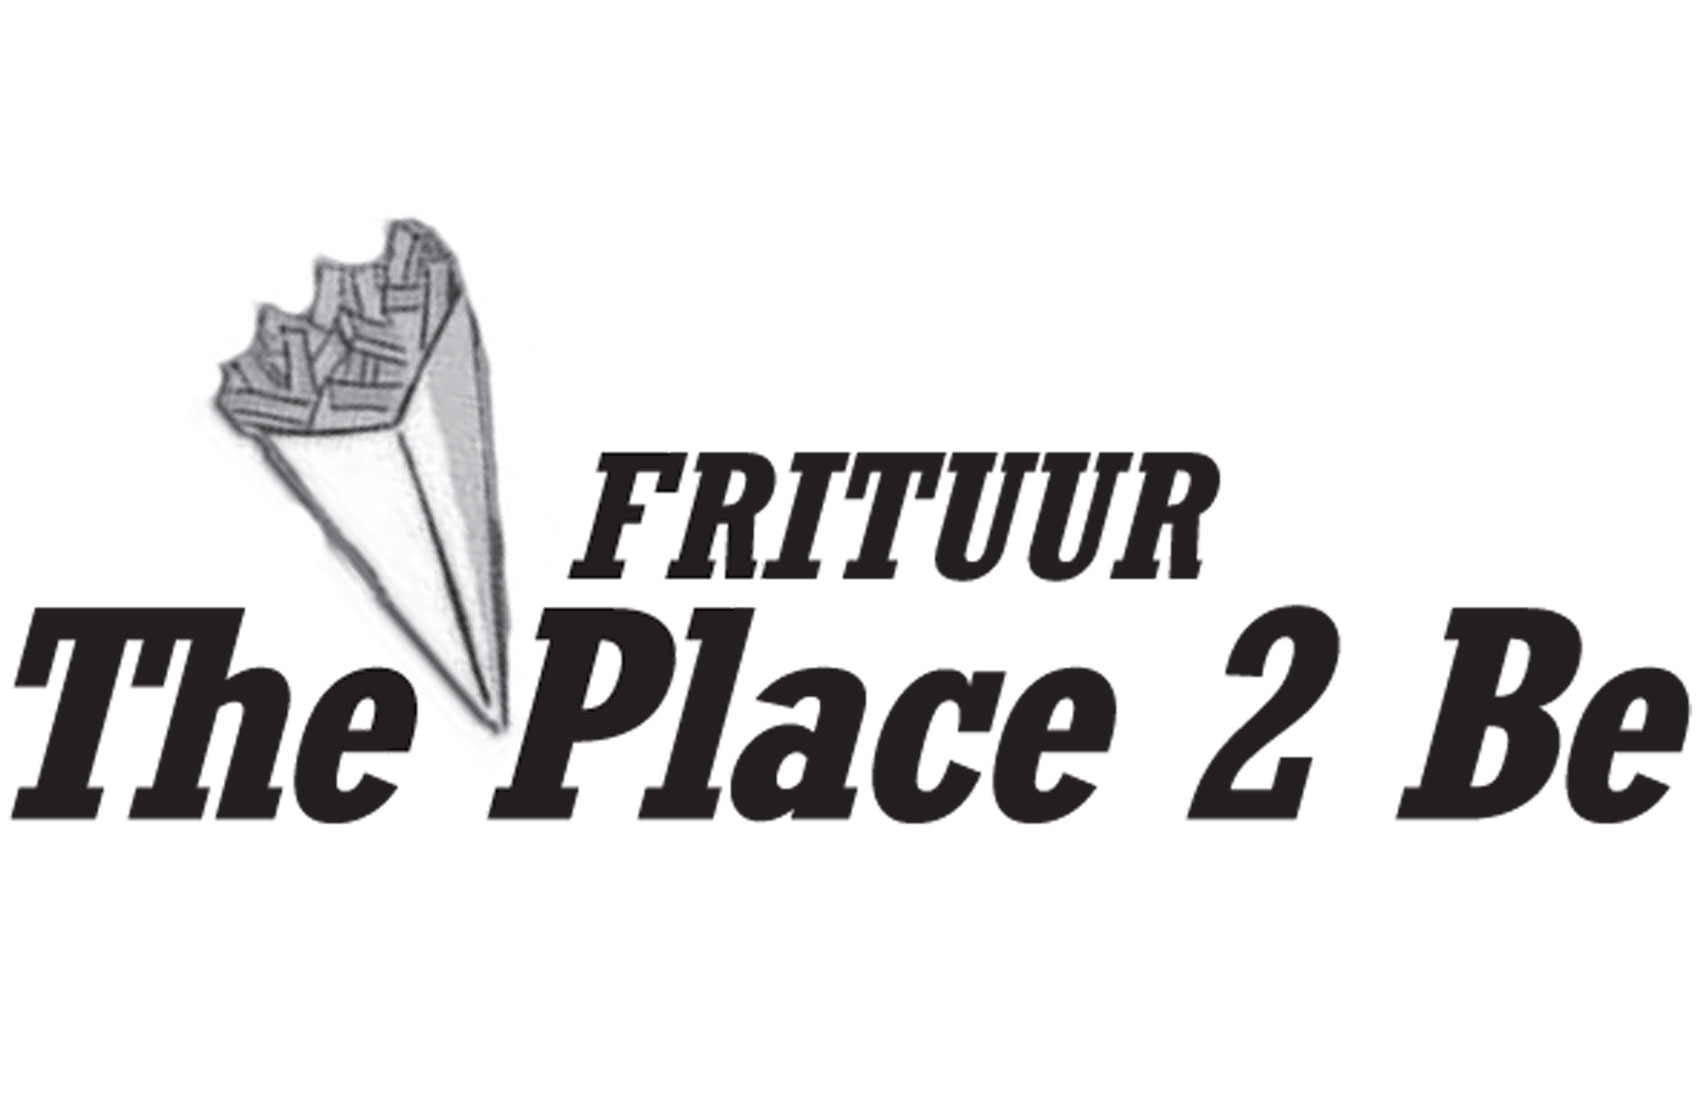 The Place To be Frituur 